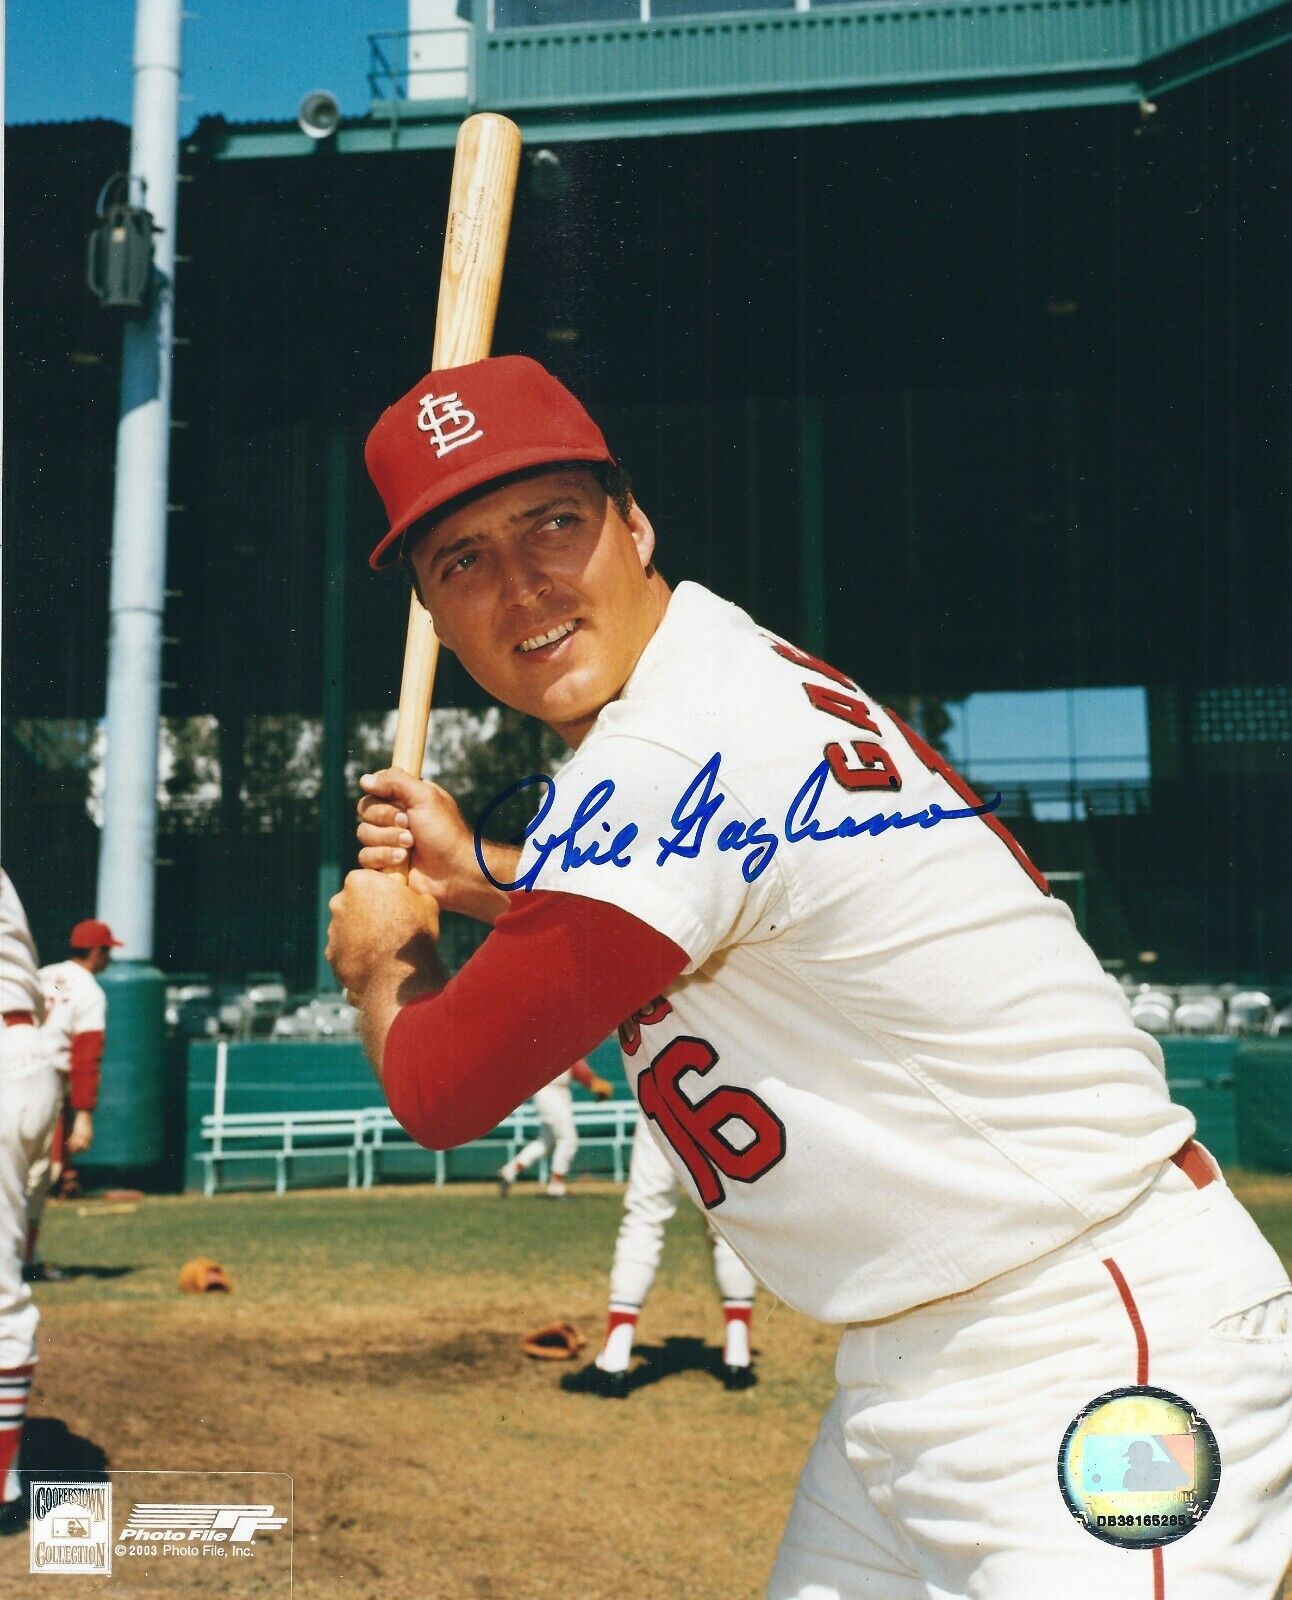 Signed 8x10 PHIL GAGLIANO St. Louis Cardinals Autographed Photo Poster painting - COA